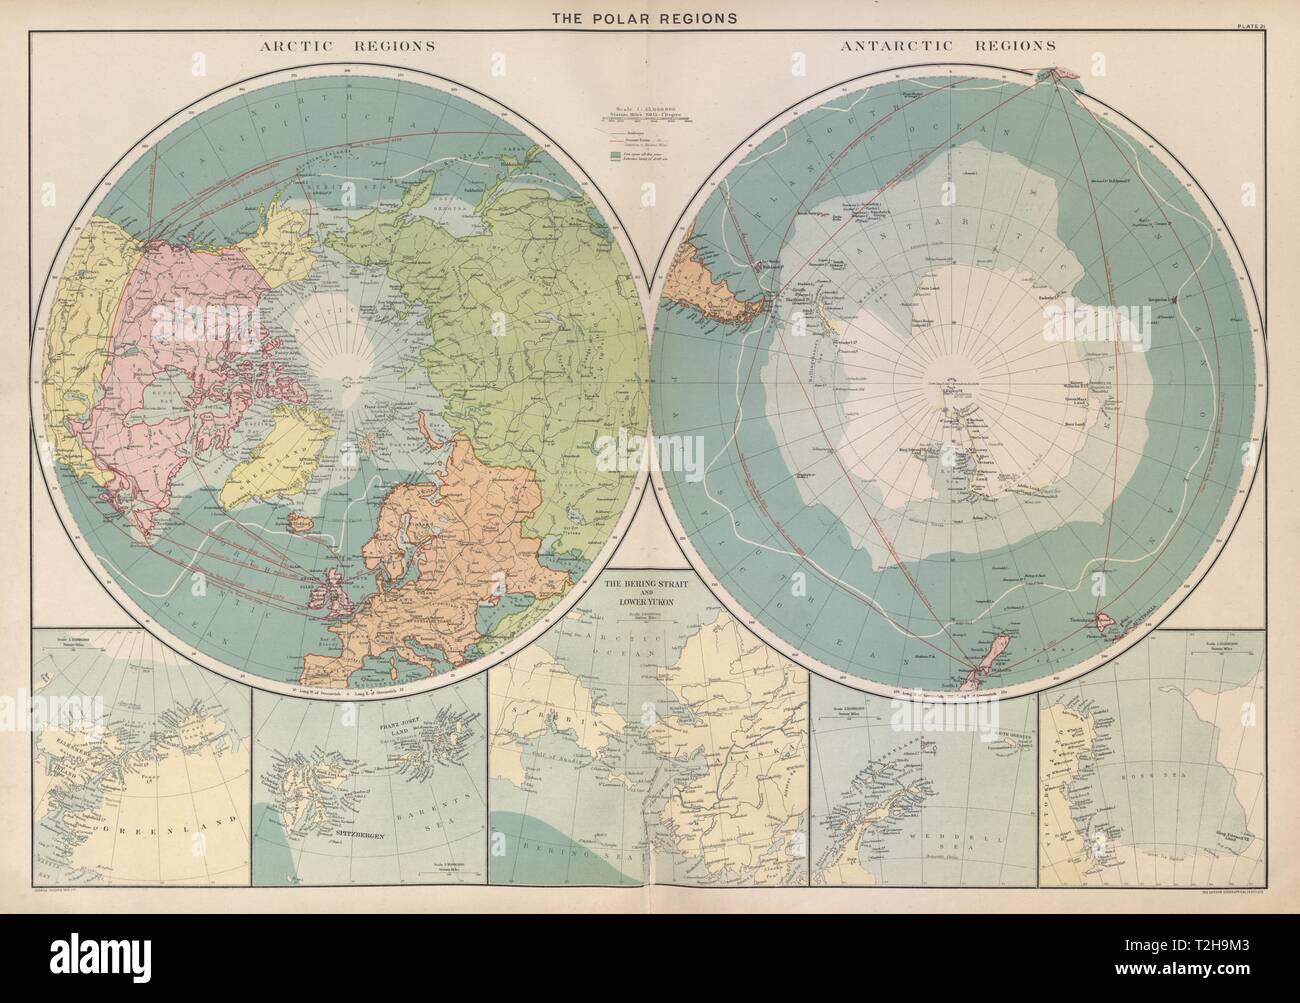 Polar Regions. Arctic/Antarctic sea chart. Steamer routes. LARGE 1916 old map Stock Photo